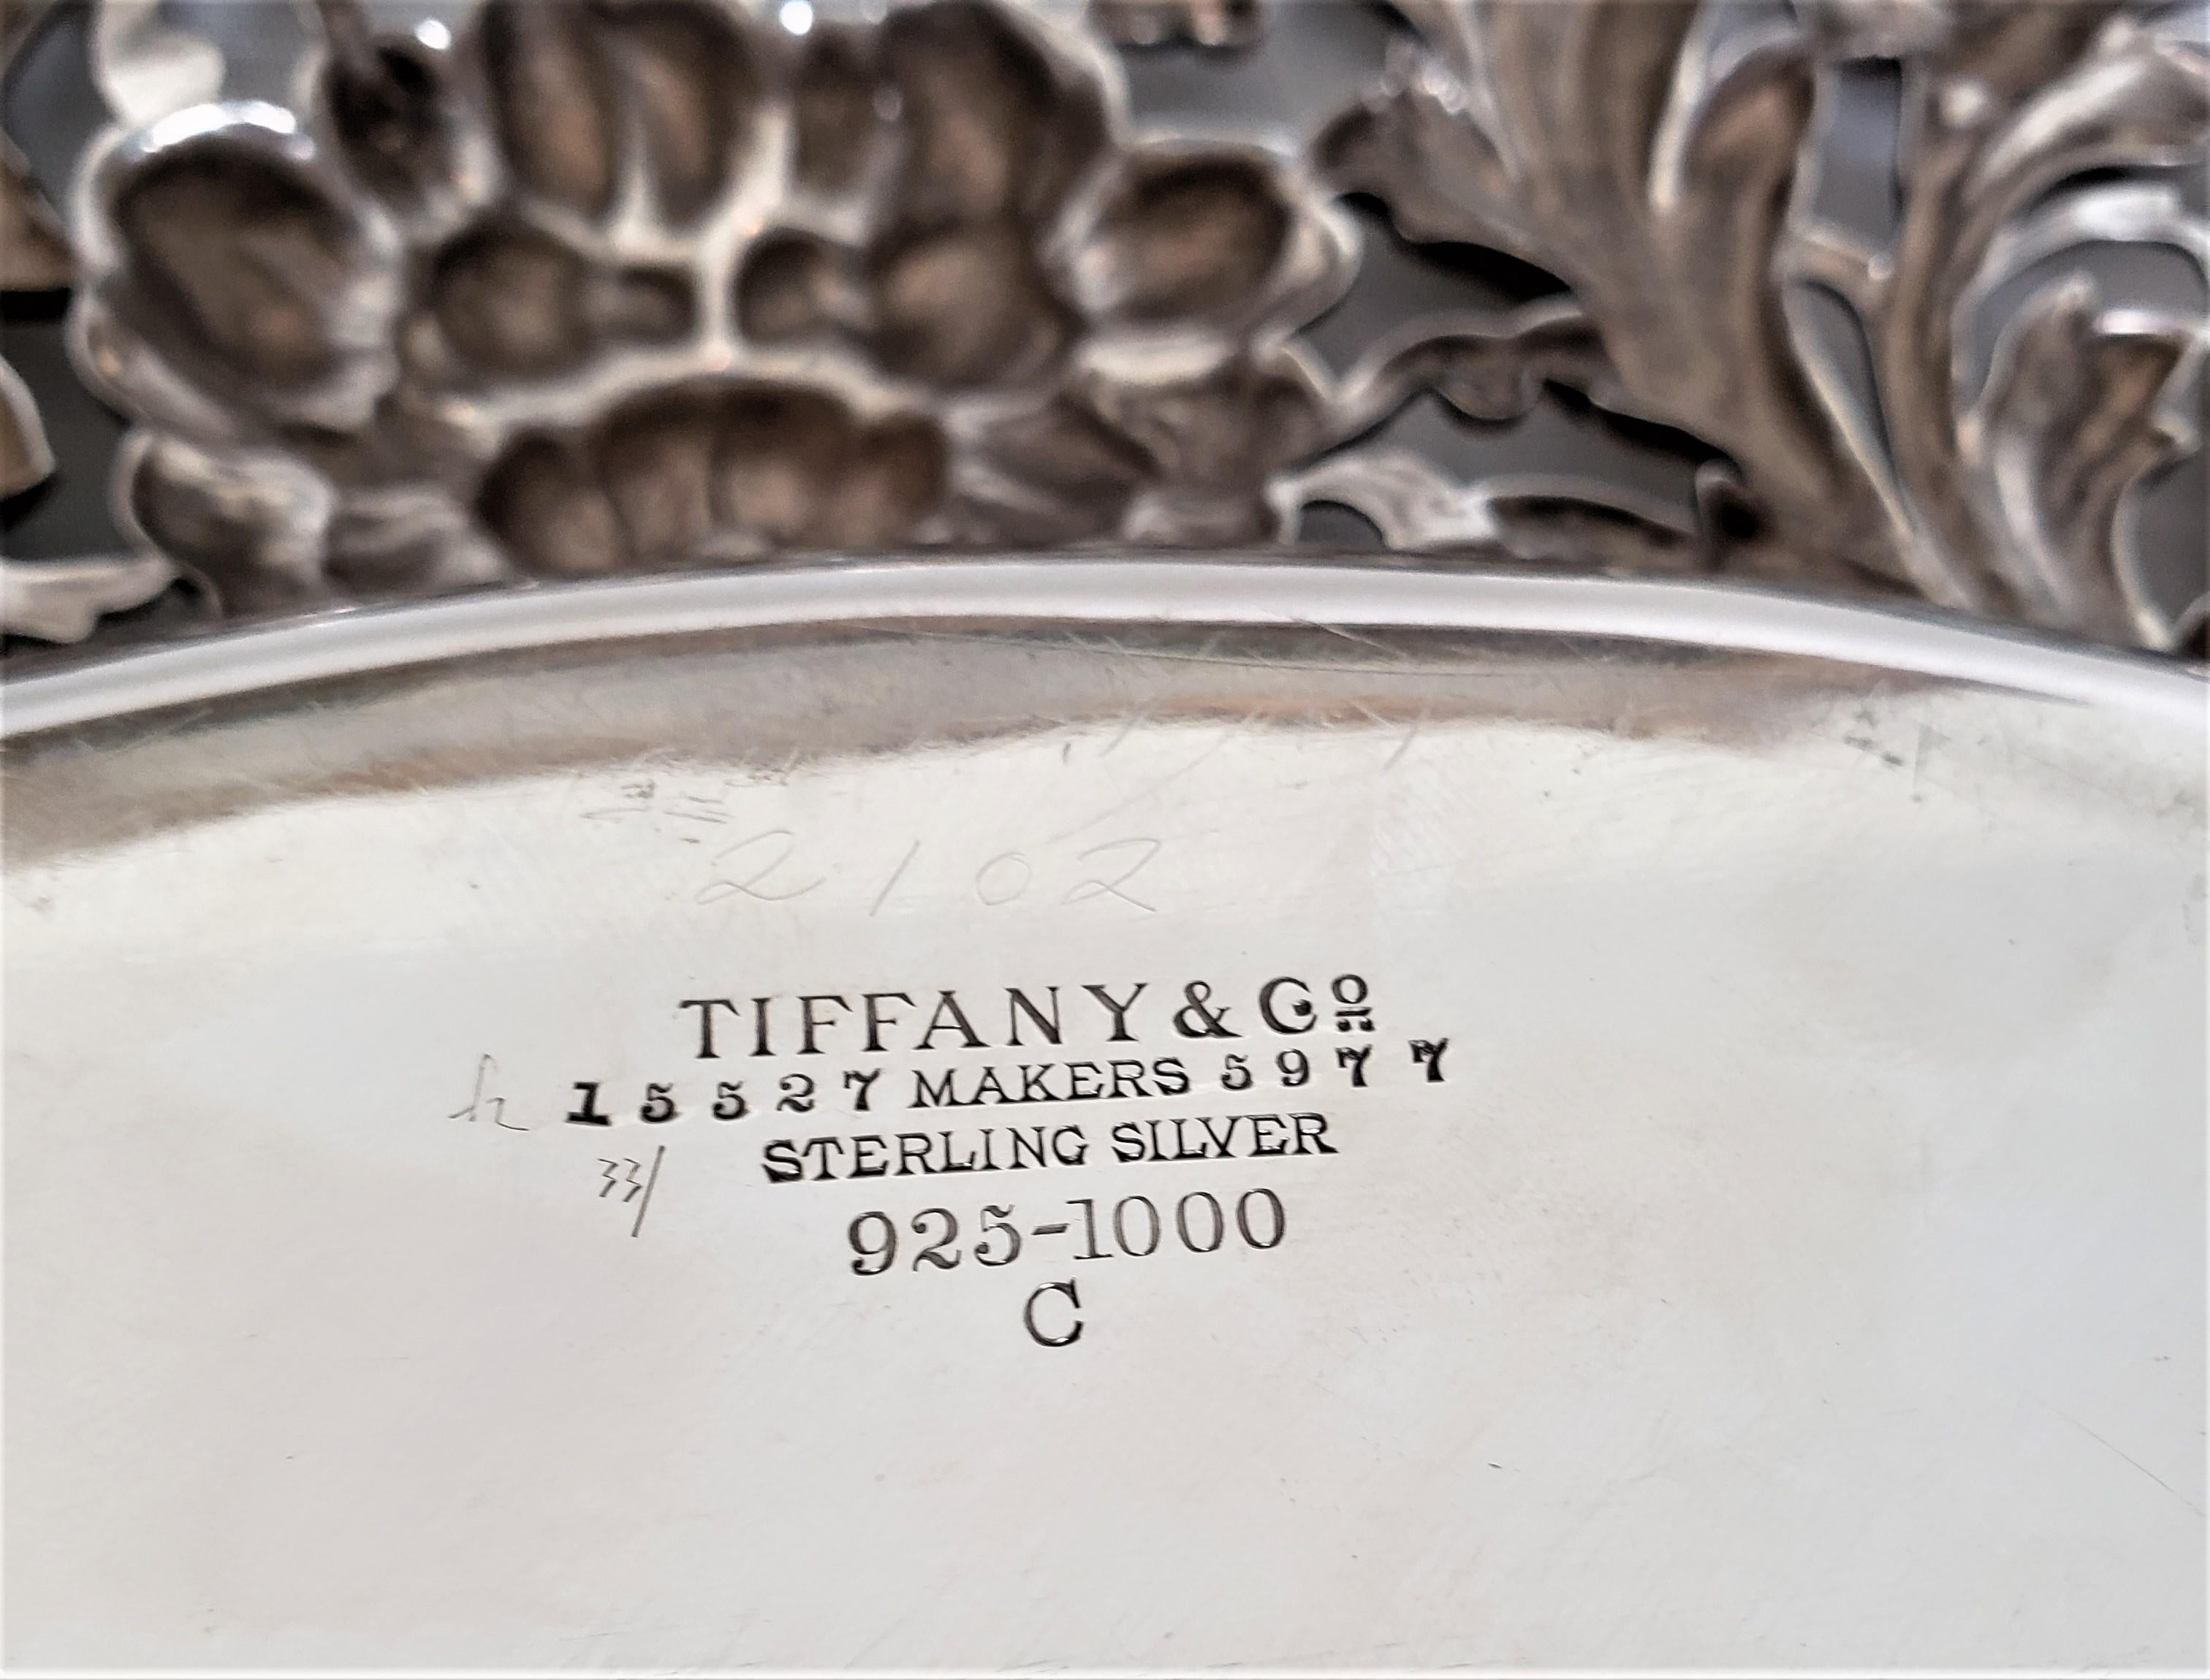 Antique Signed Tiffany & Co. Sterling Silver Serving Dish with Floral Decoration In Good Condition For Sale In Hamilton, Ontario